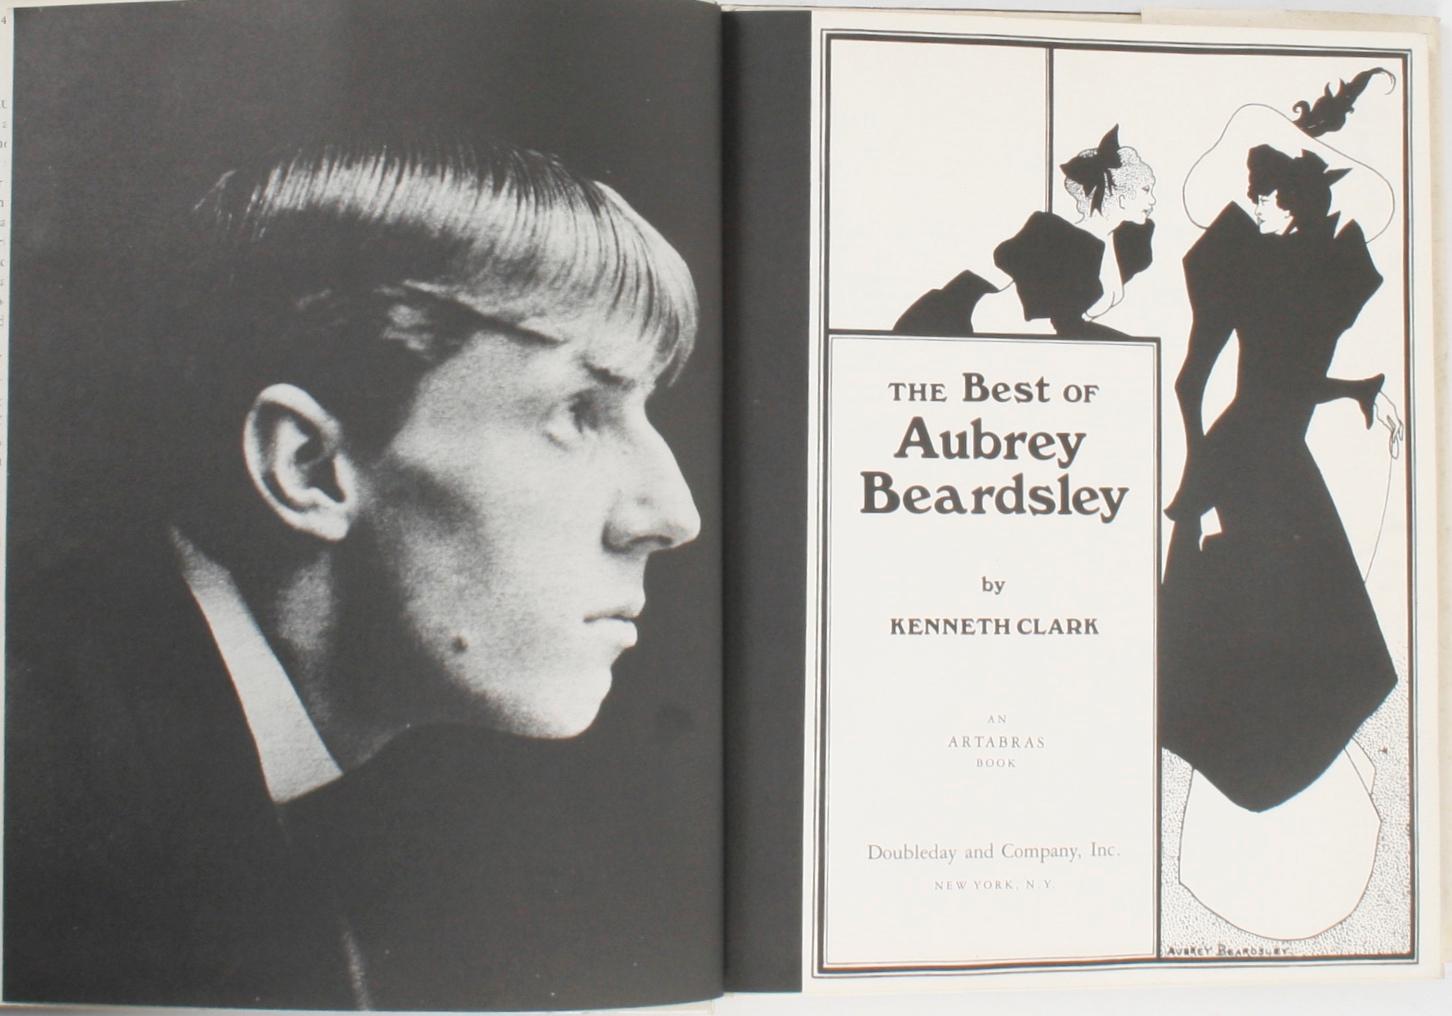 The Best of Aubrey Beardsley by Kenneth Clark. New York: Doubleday and Company, Inc., 1978. 1st Ed hardcover with dust jacket. 173 pp. An overview of Aubrey Vincent Beardsley (1872-1898), the English illustrator and author, with sixty of his